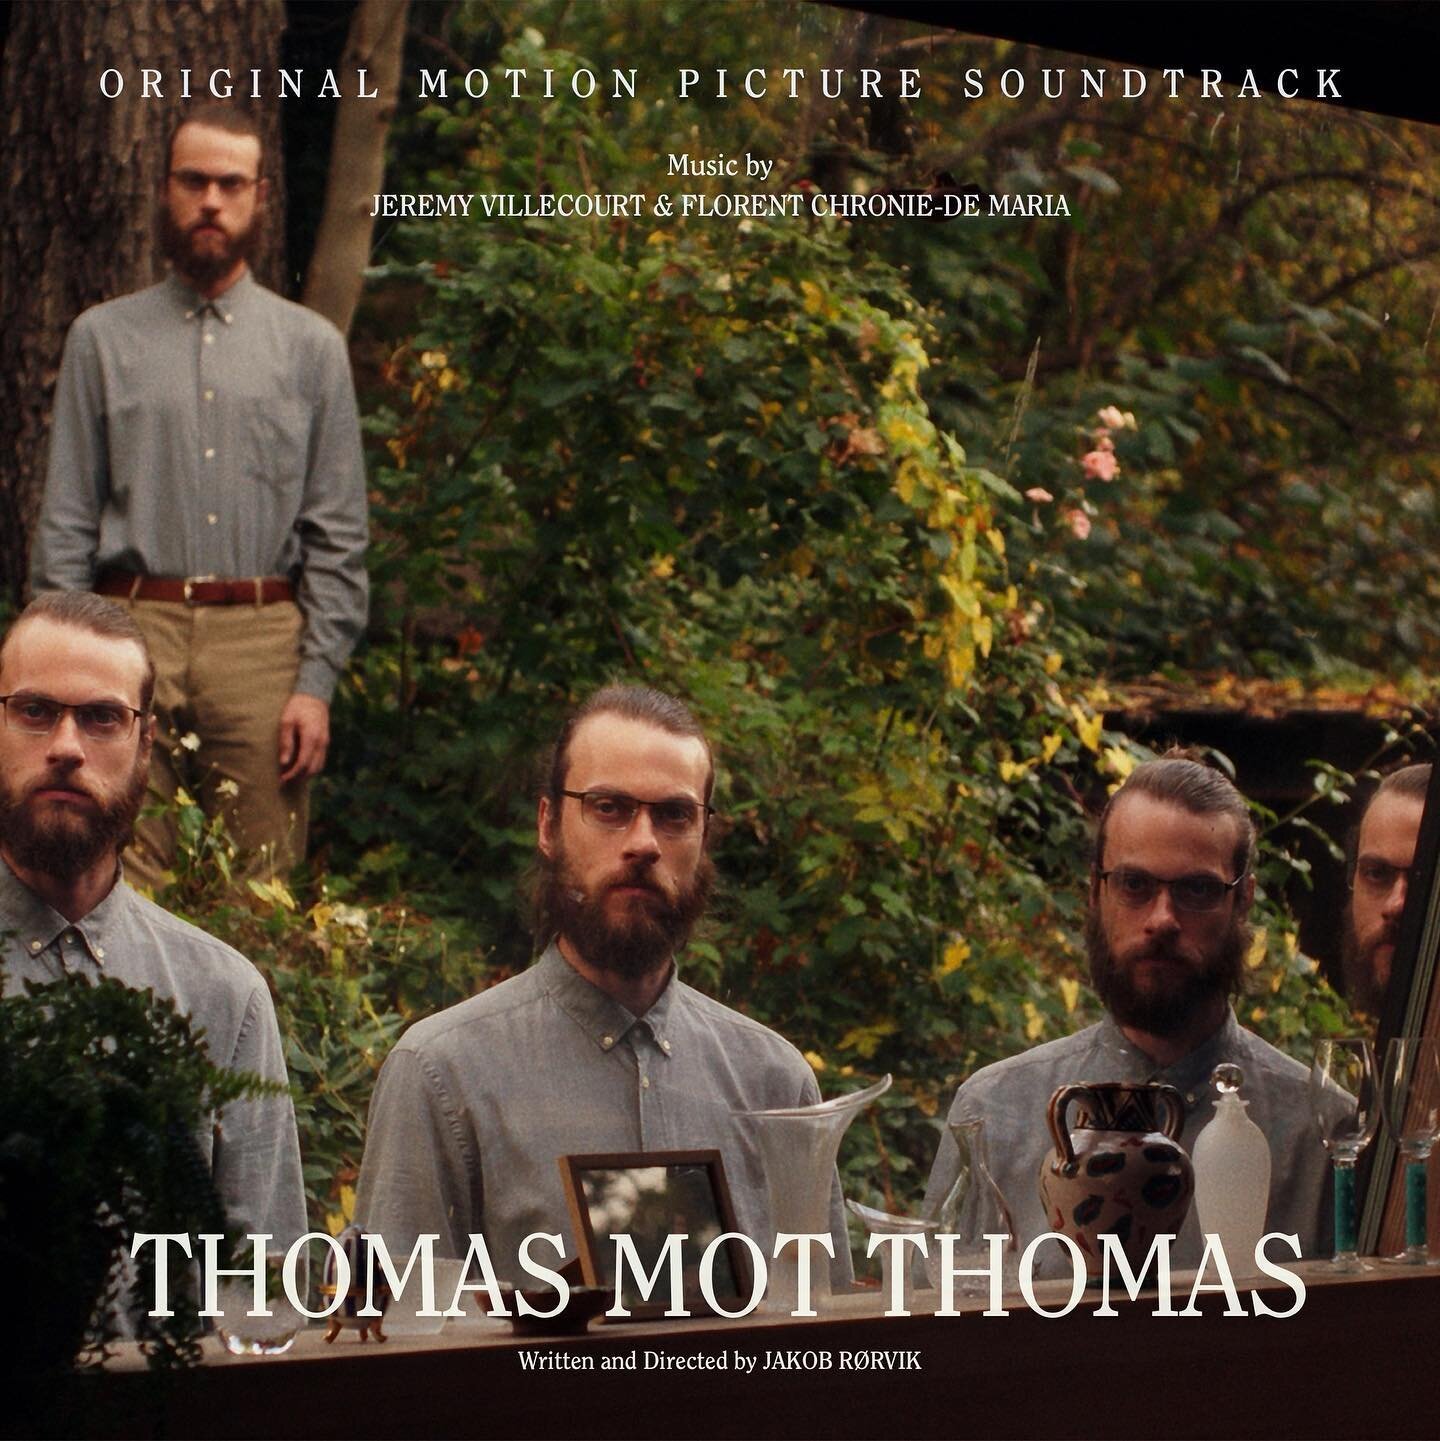 &laquo;Thomas vs. Thomas&raquo; soundtrack is now out on Spotify. Link in bio. Composed by the insanely talented Florent Chronie-De Maria and Jeremy Villecourt. Thank you for adding so much emotional nuance and deeply felt mood to the film. 💛💛